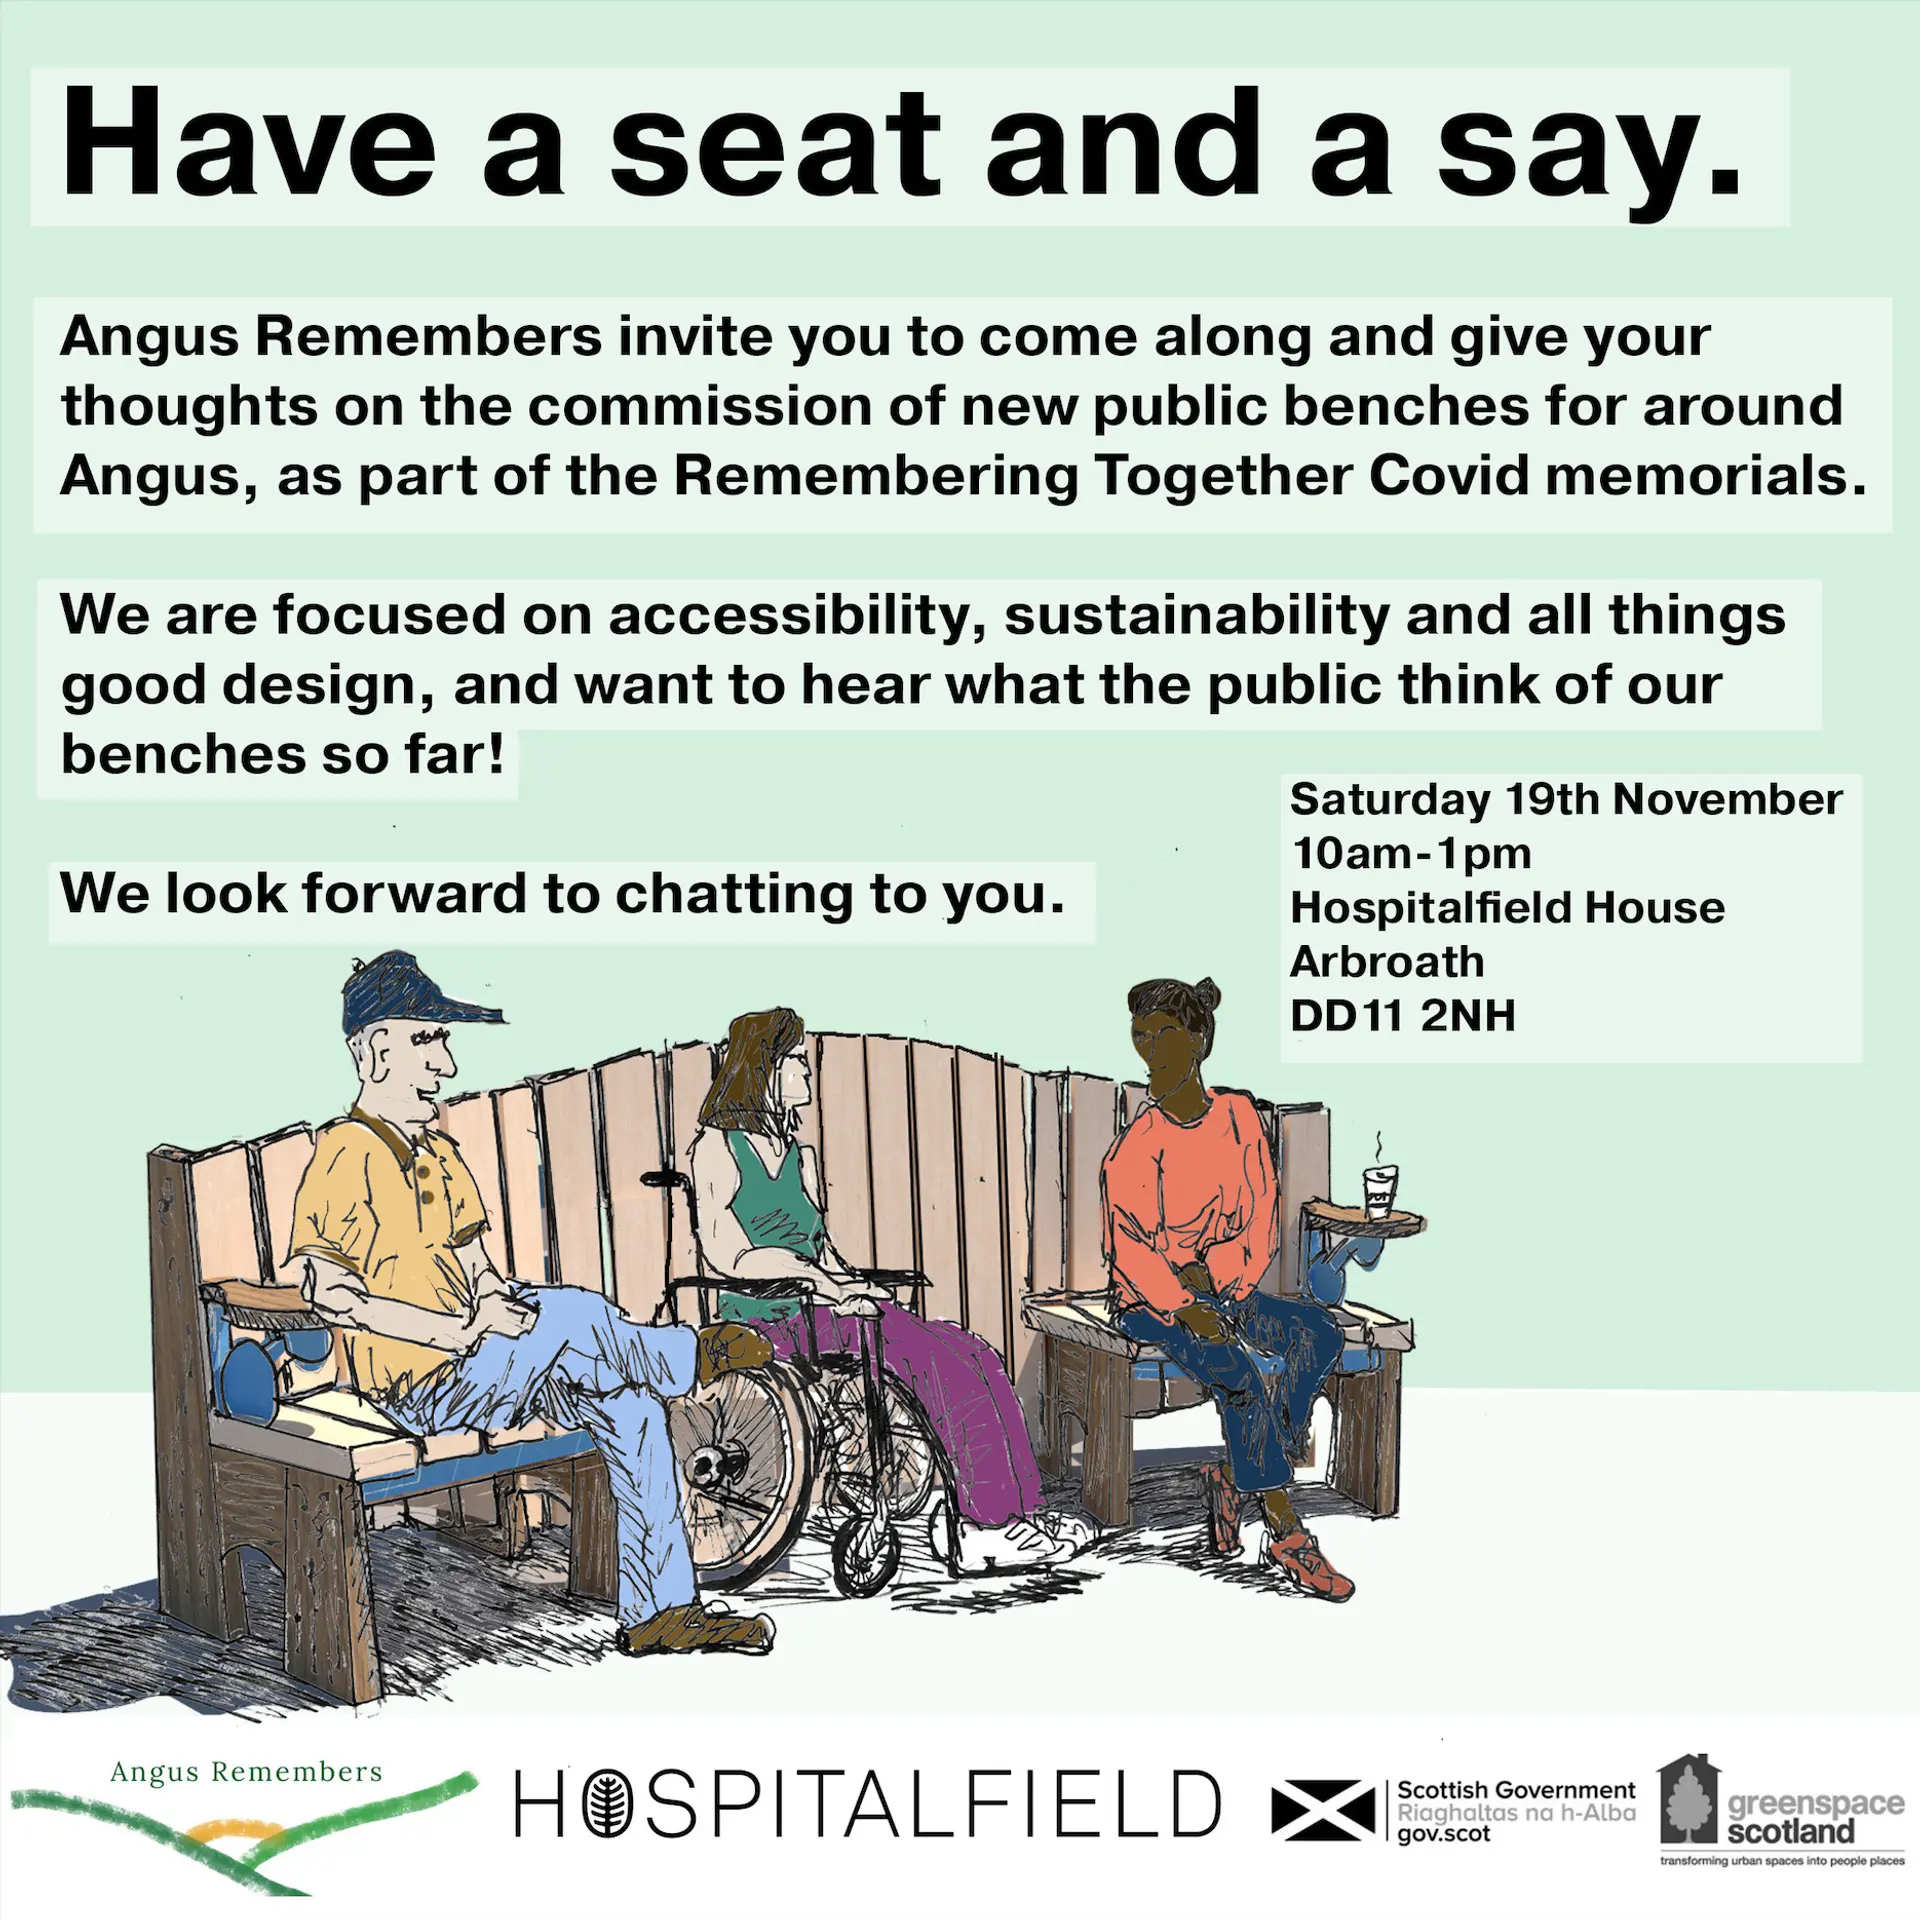 A poster with graphics and writing. The heading reads “Have a seat and a say’. It is an invite to see initial bench design ideas and an opportunity to give feedback. The bench is solid all the way around, 3 people sit chatting, 2 people on either side of a person using a wheelchair and  positioned in the middle of the bench.